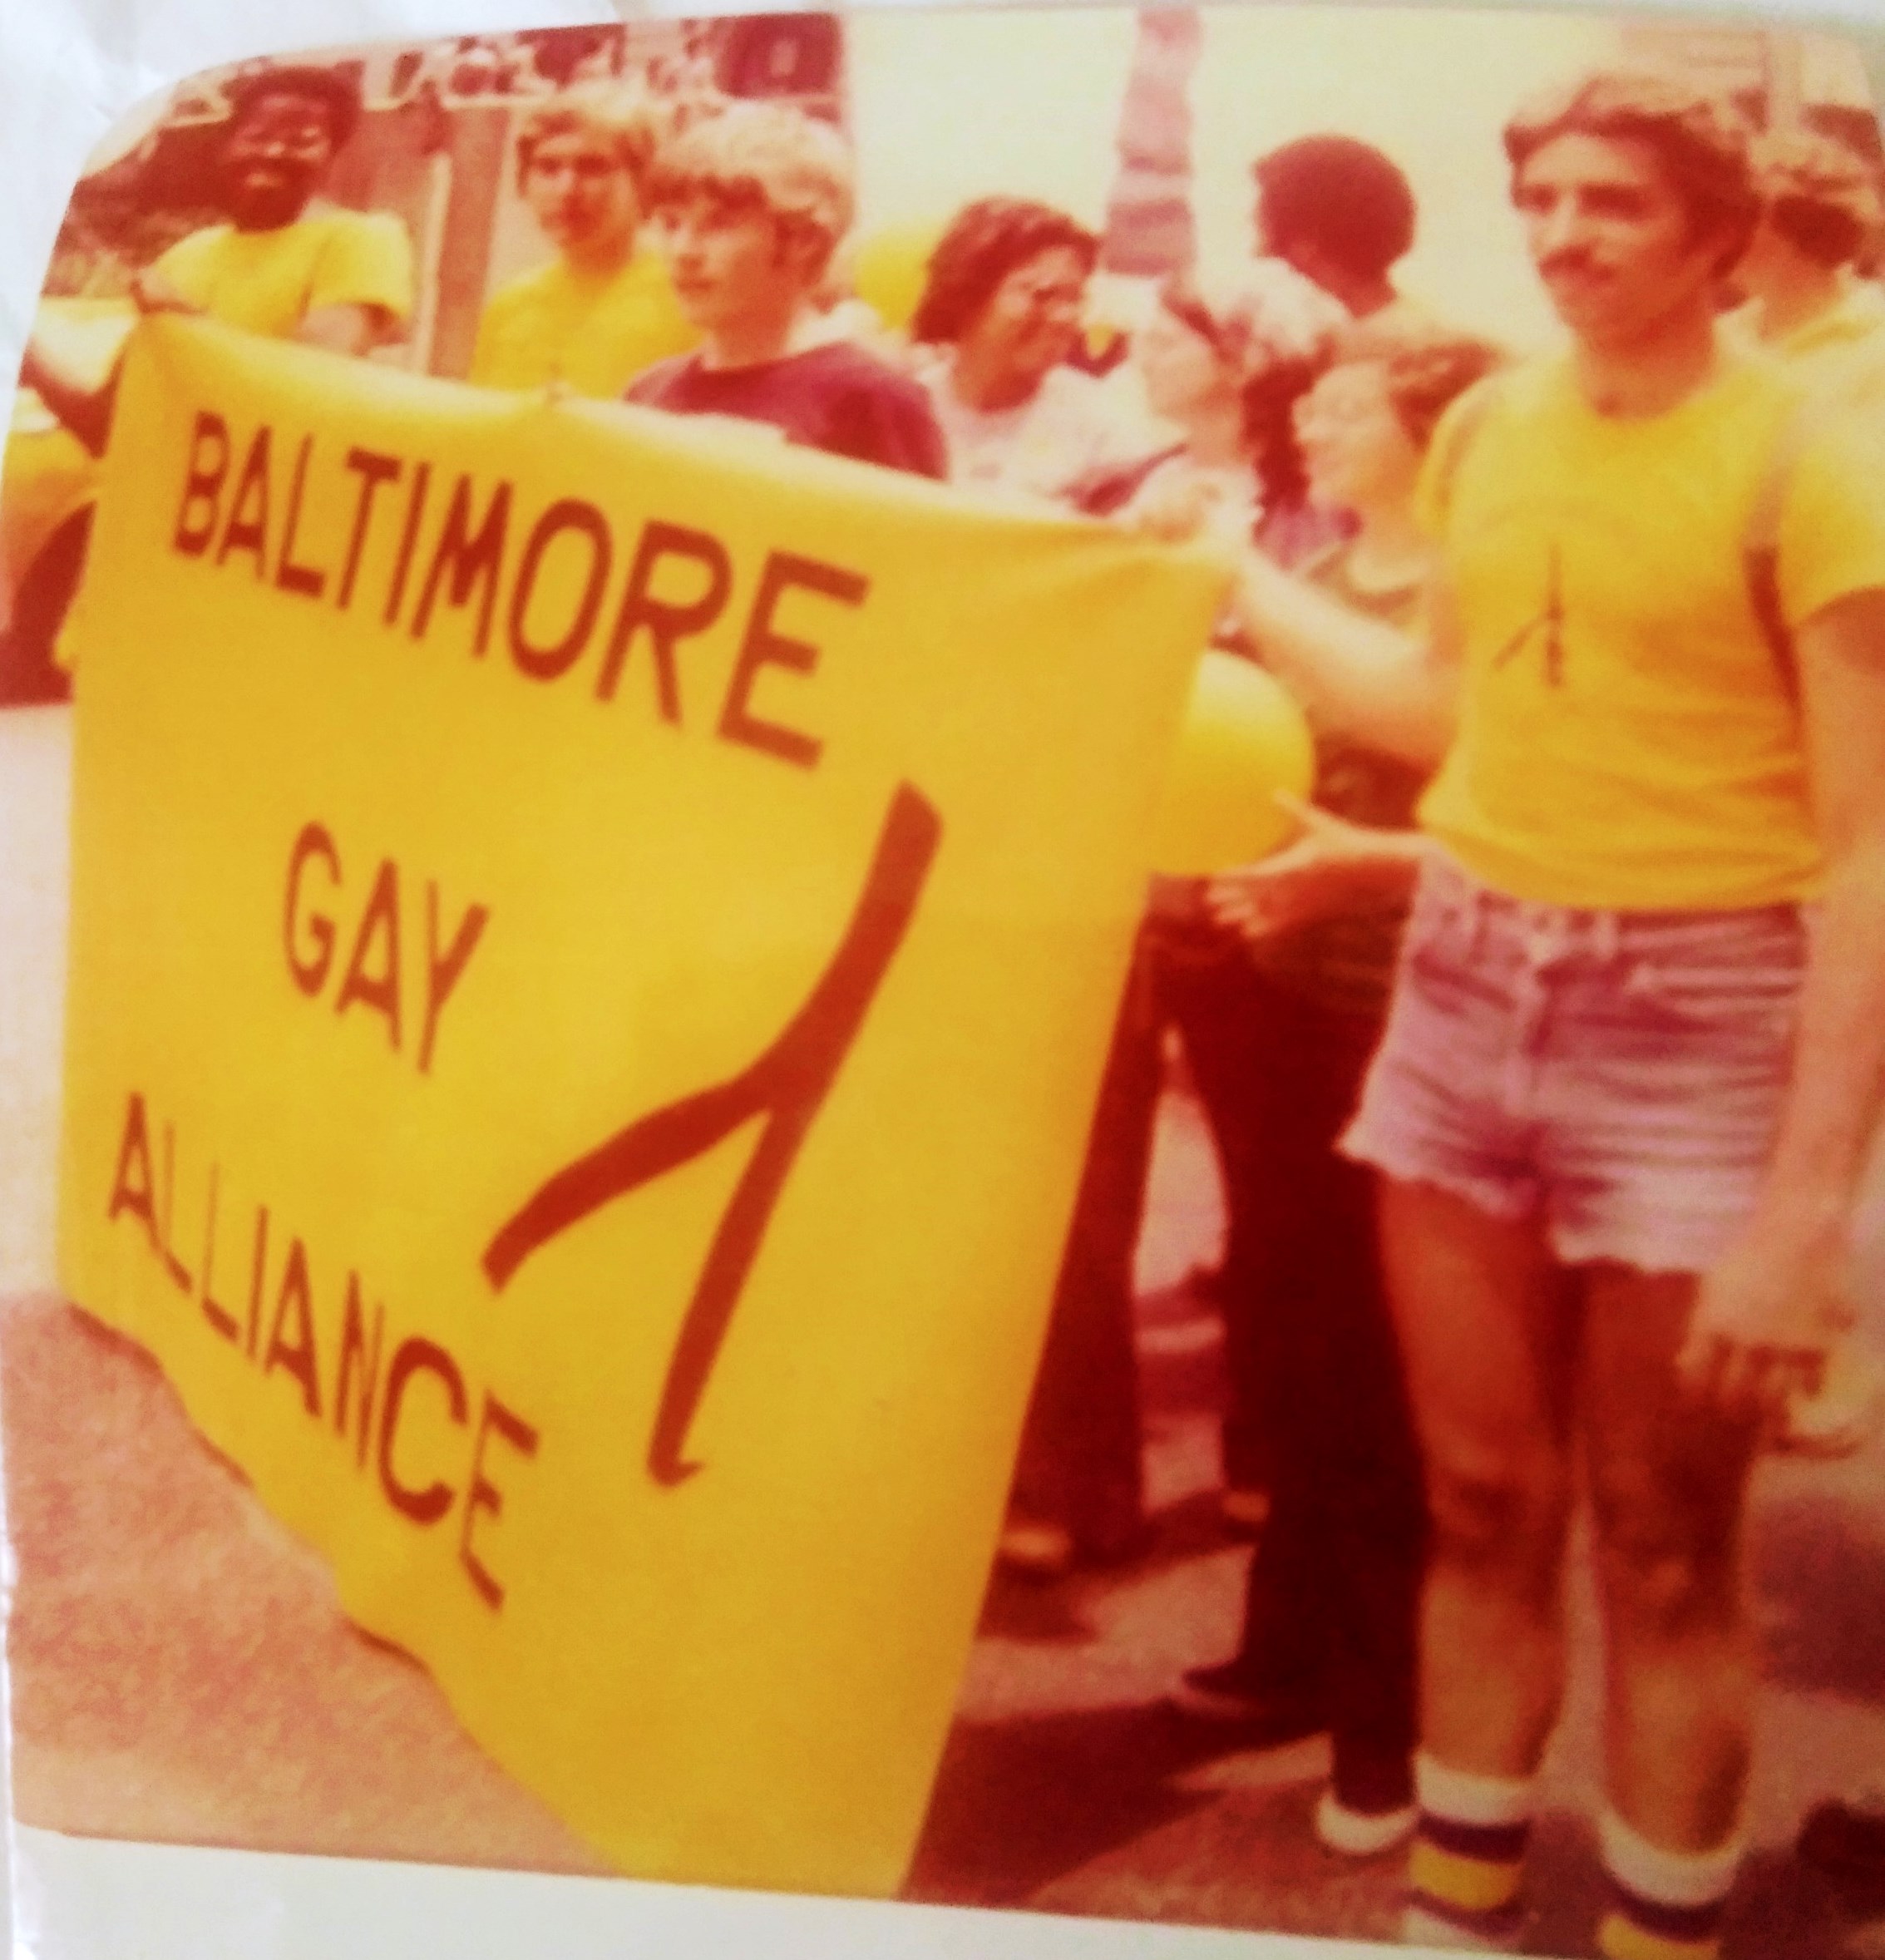 Baltimore Gay Alliance participating in New York City's Christopher Street Parade in 1976.